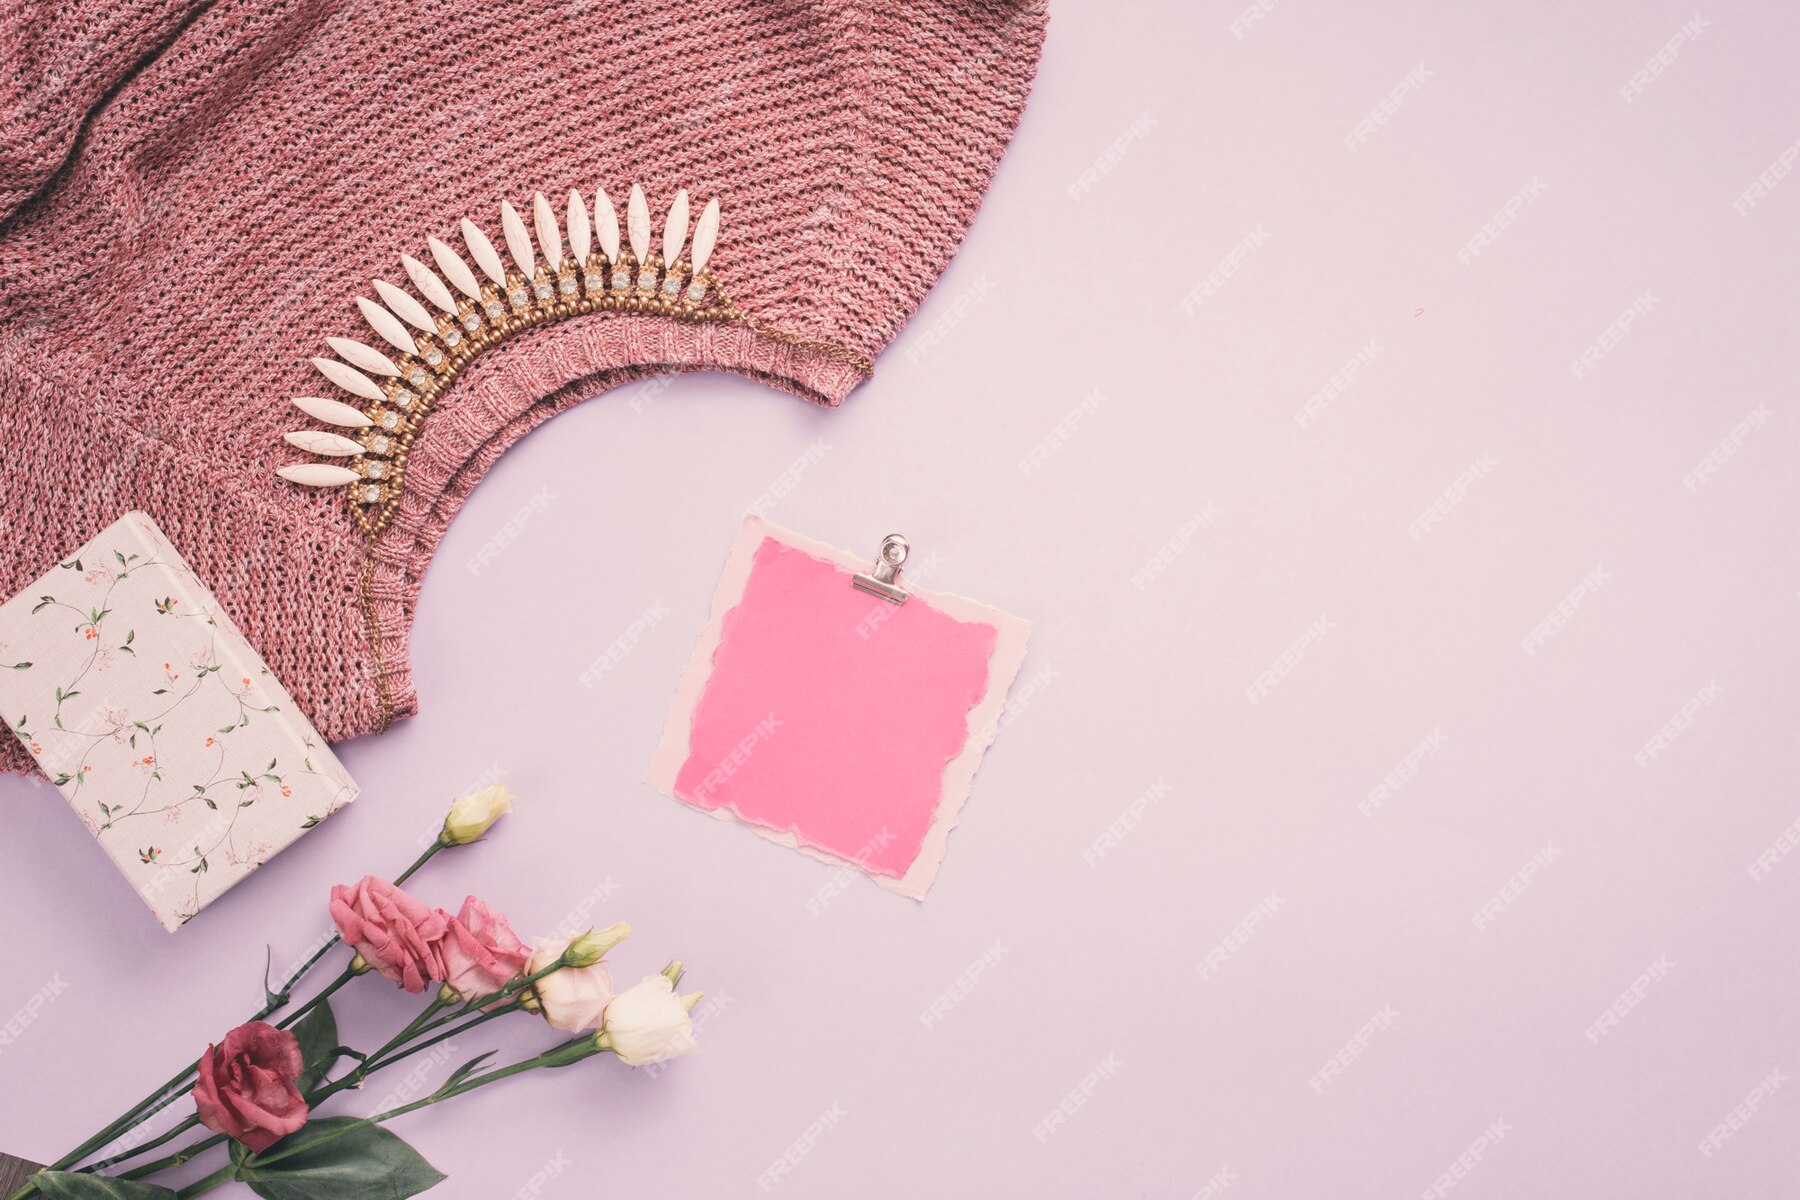 Free Photo | Blank paper with rose flowers, necklace and sweater on table